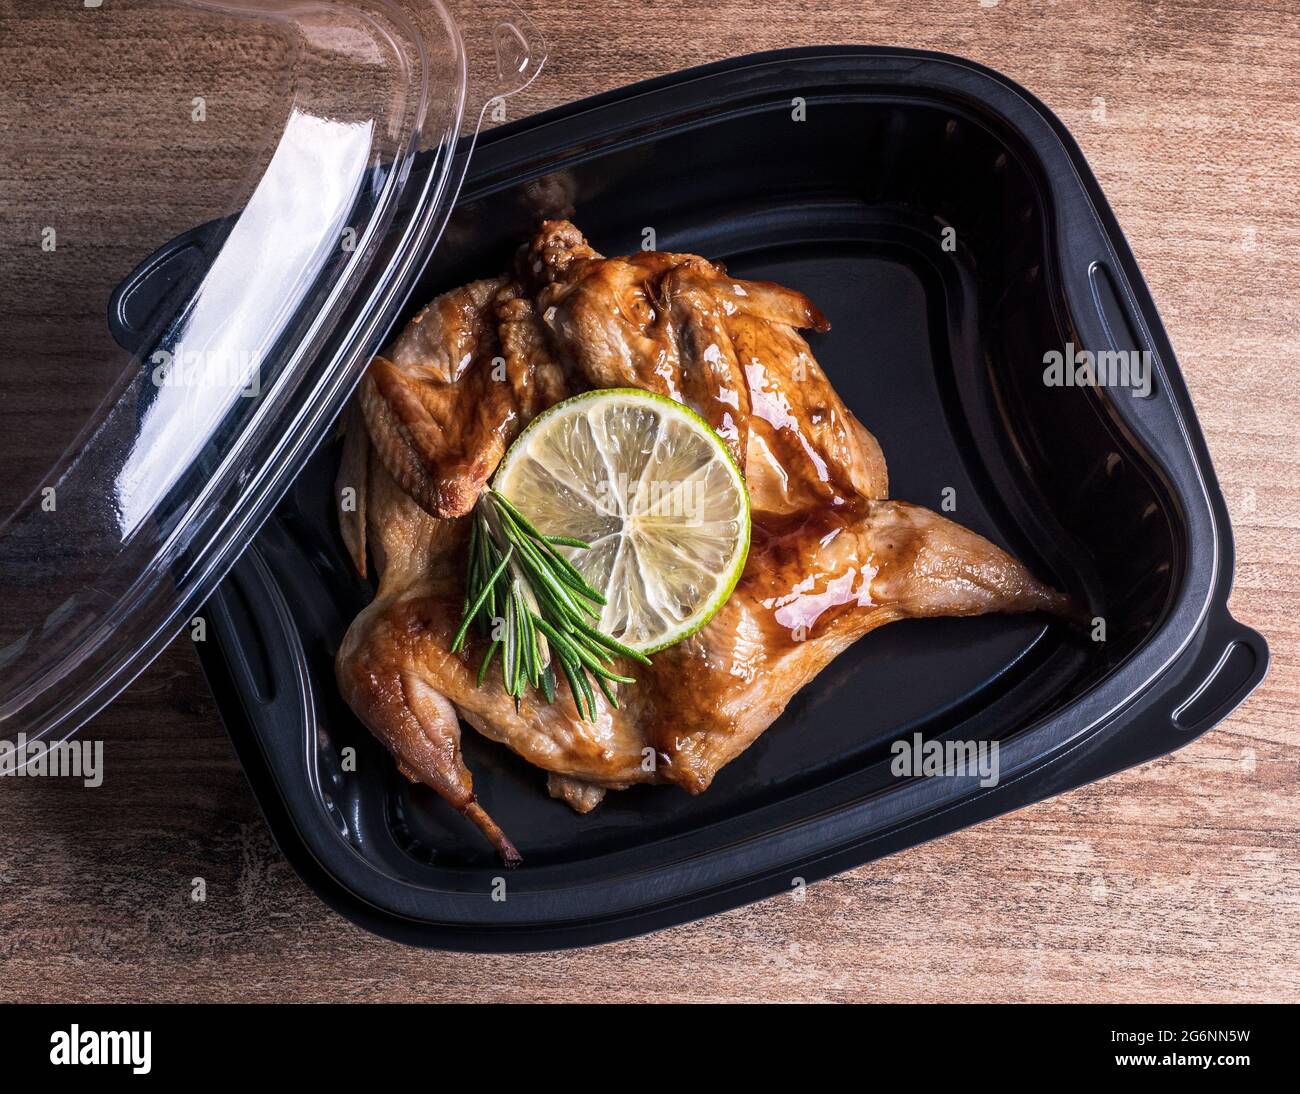 Roasted meat of a whole quail in a plastic container, top view. Hot meal takeaway food service to home in a restaurant. Stock Photo